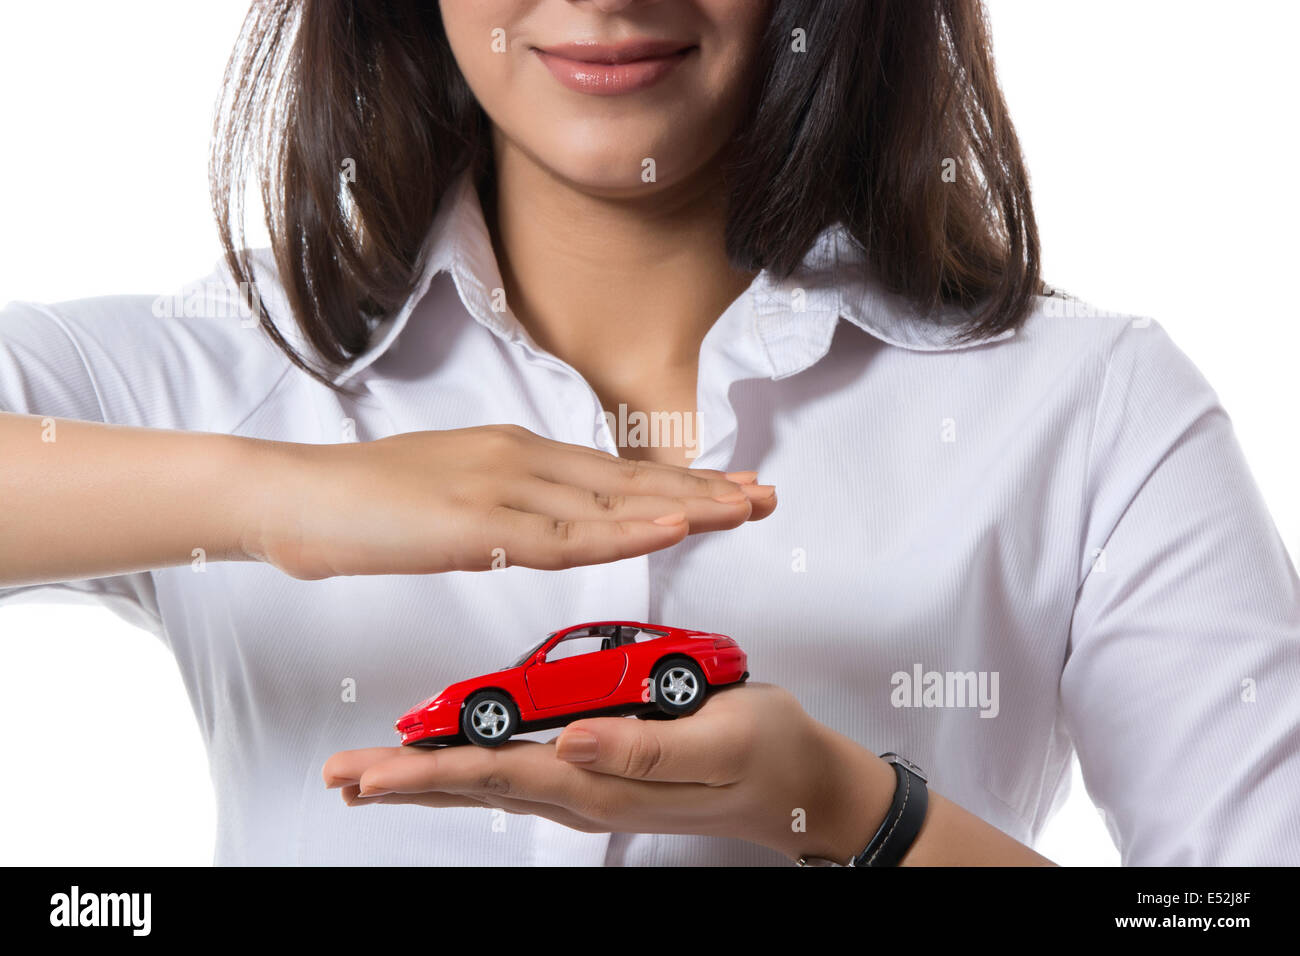 Midsection of female insurance agent holding toy car against white background Stock Photo